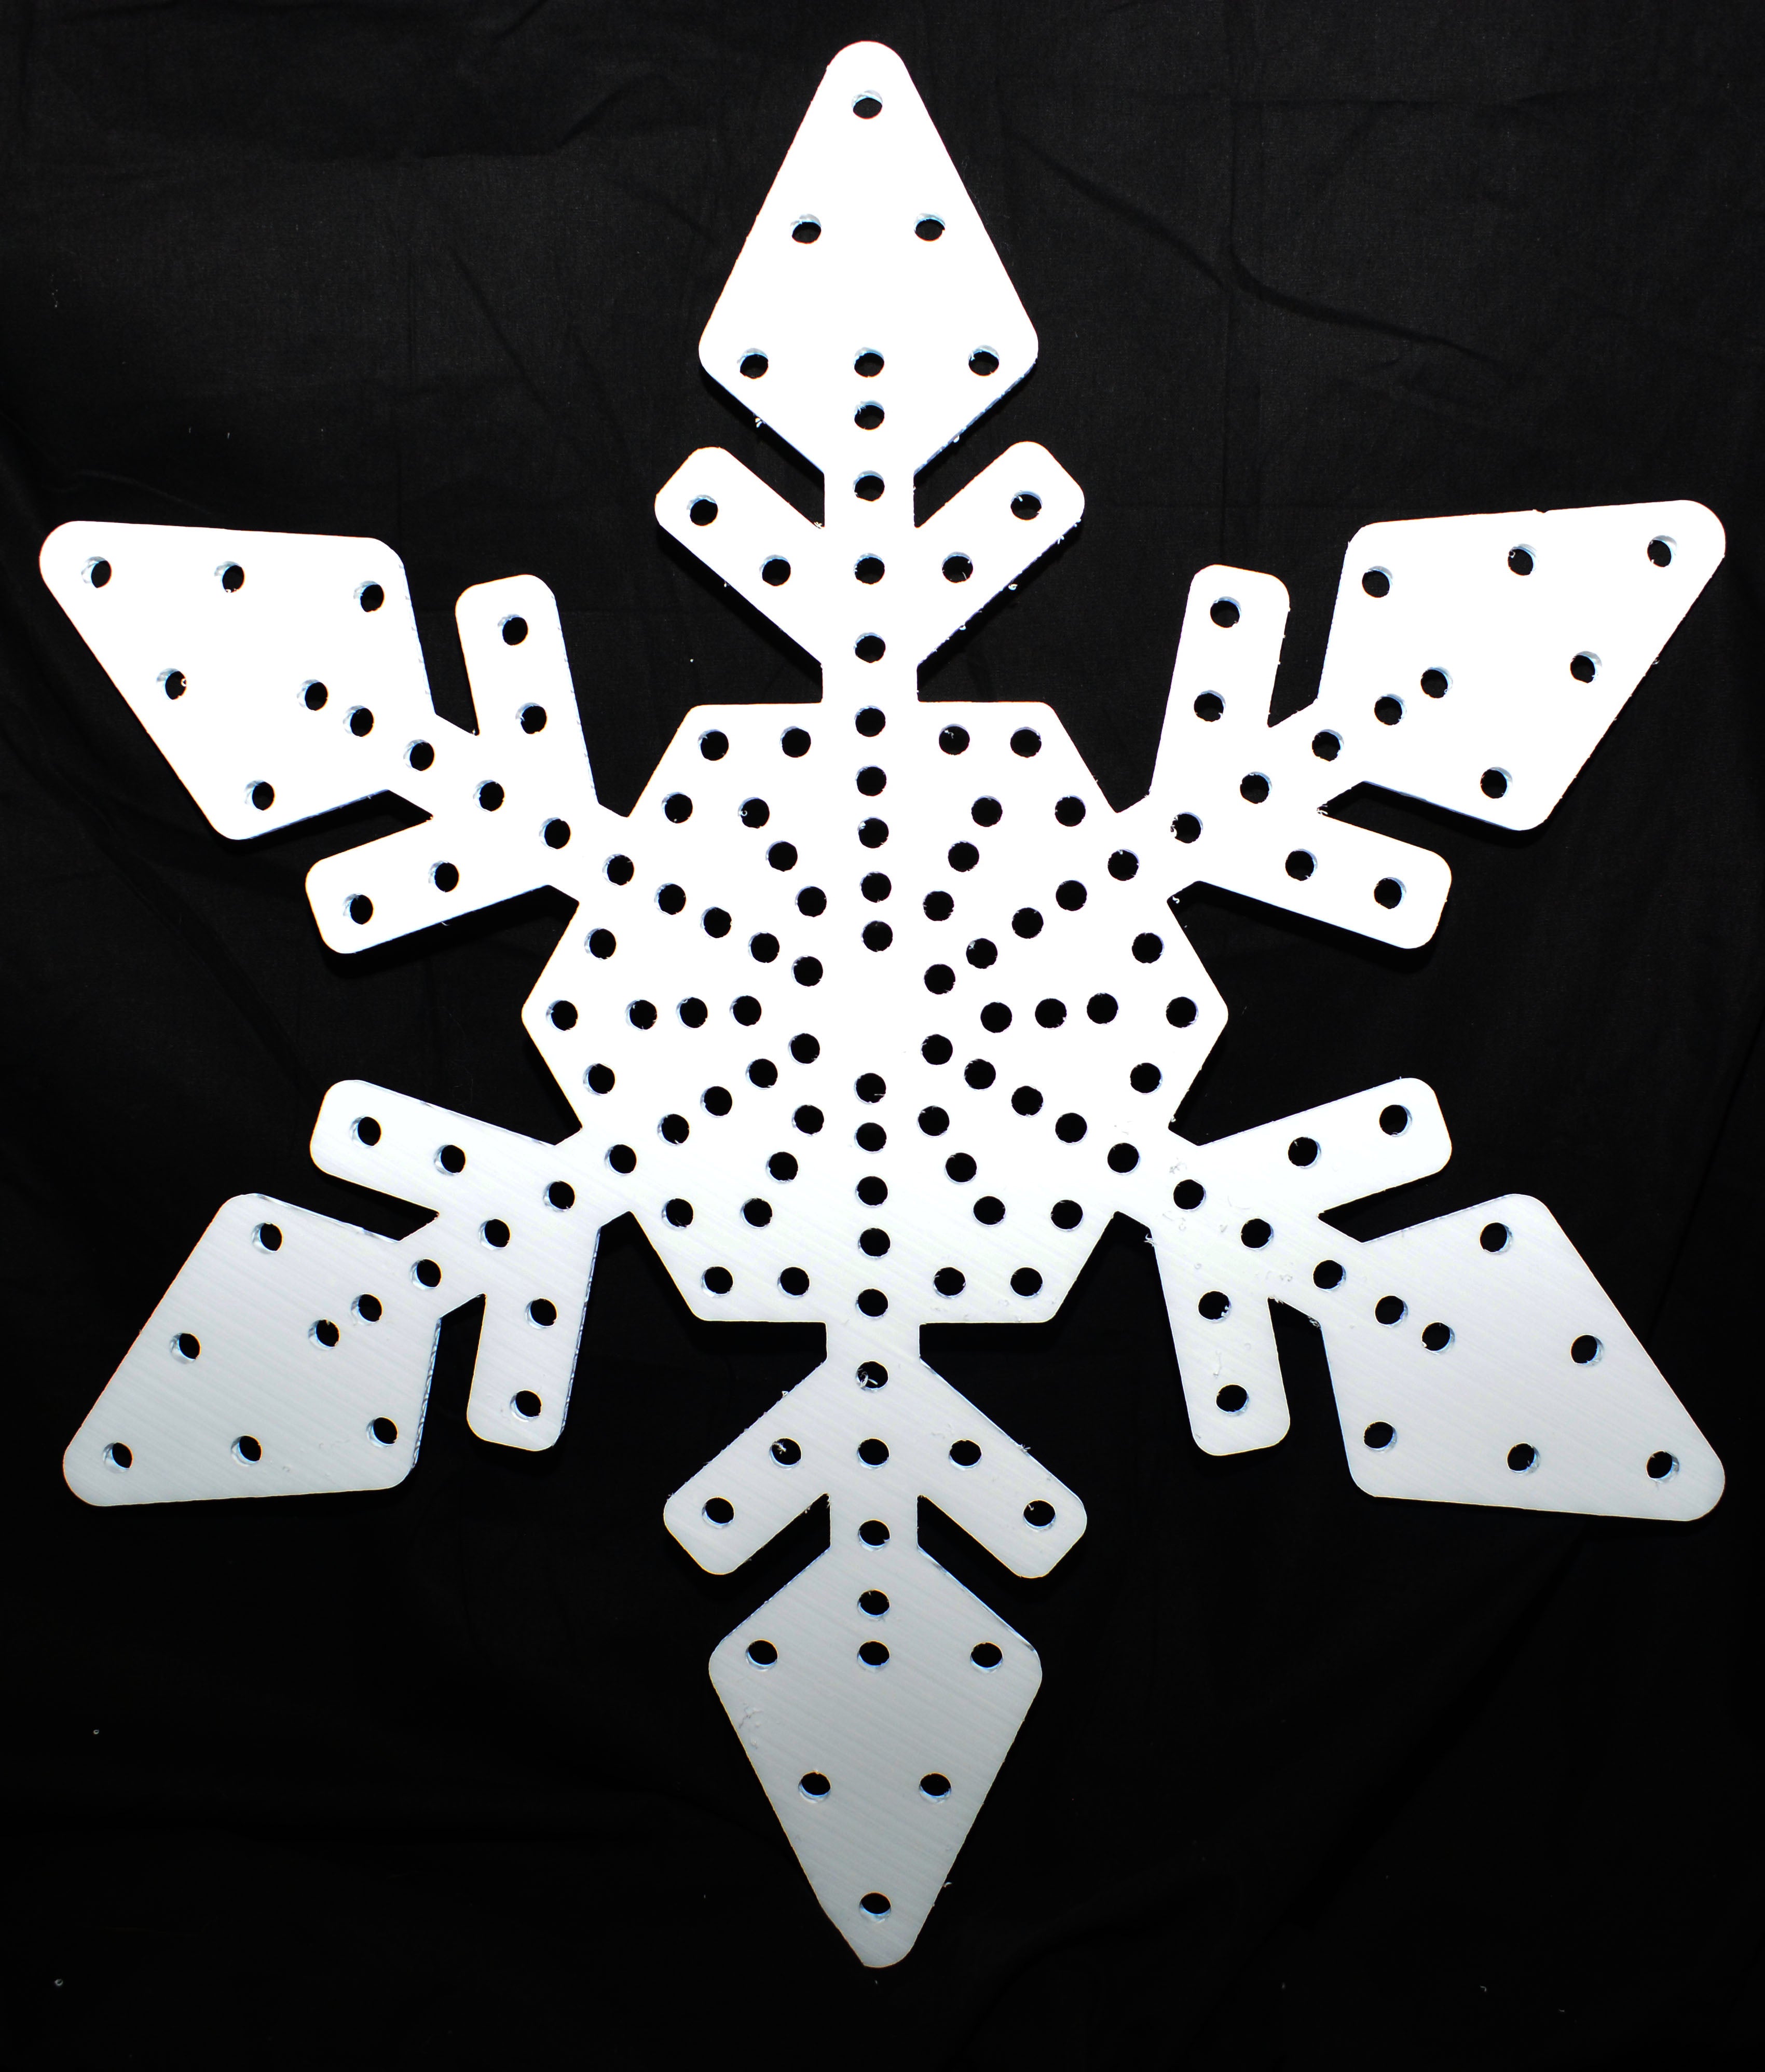 Freestanding Snowflake Template  Digital Template – Event Answer